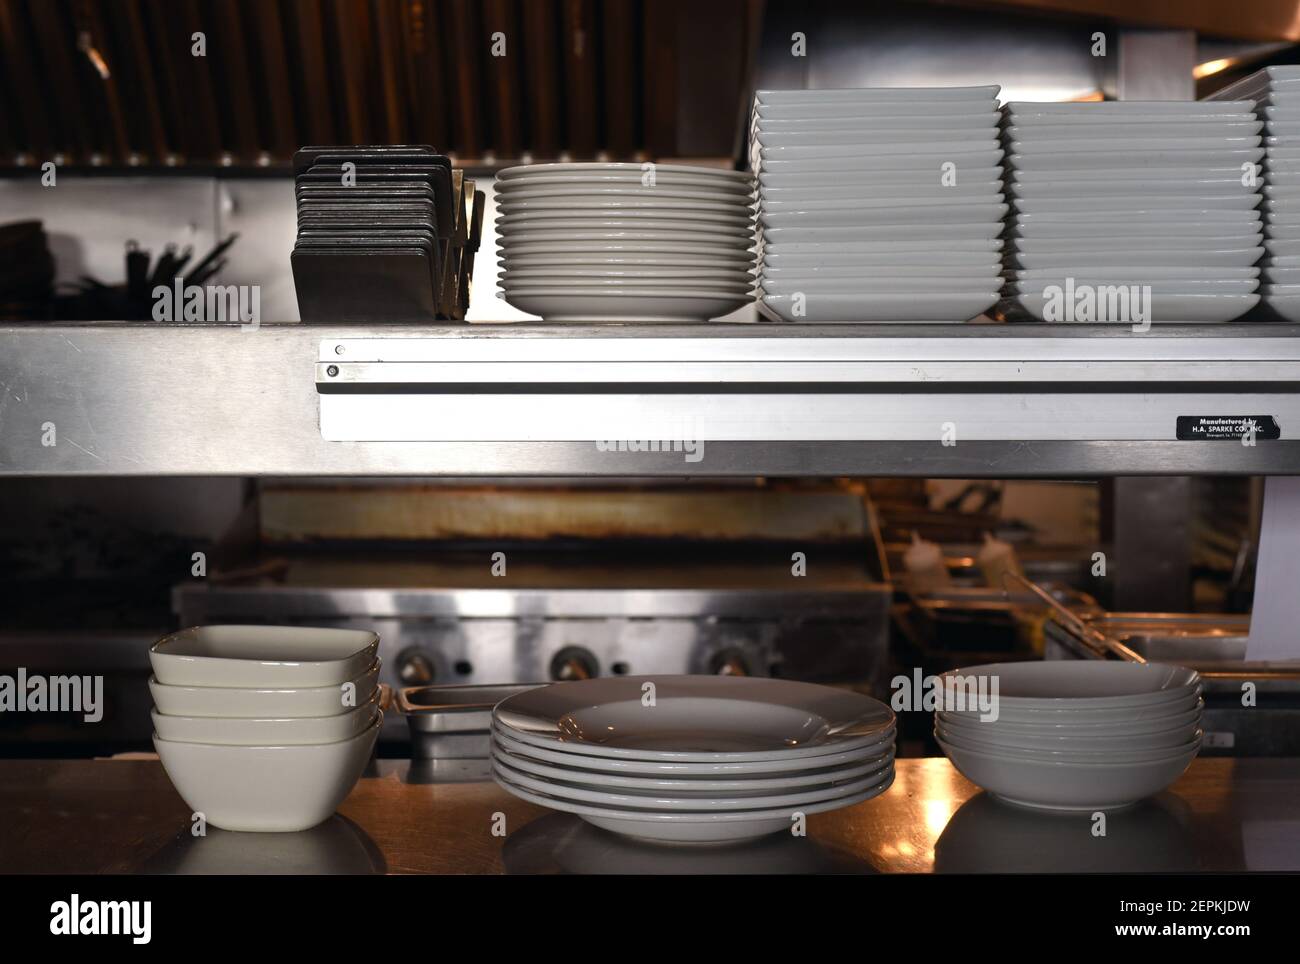 Dishes of various sizes and shapes line a counter in a kitchen in a restaurant Stock Photo